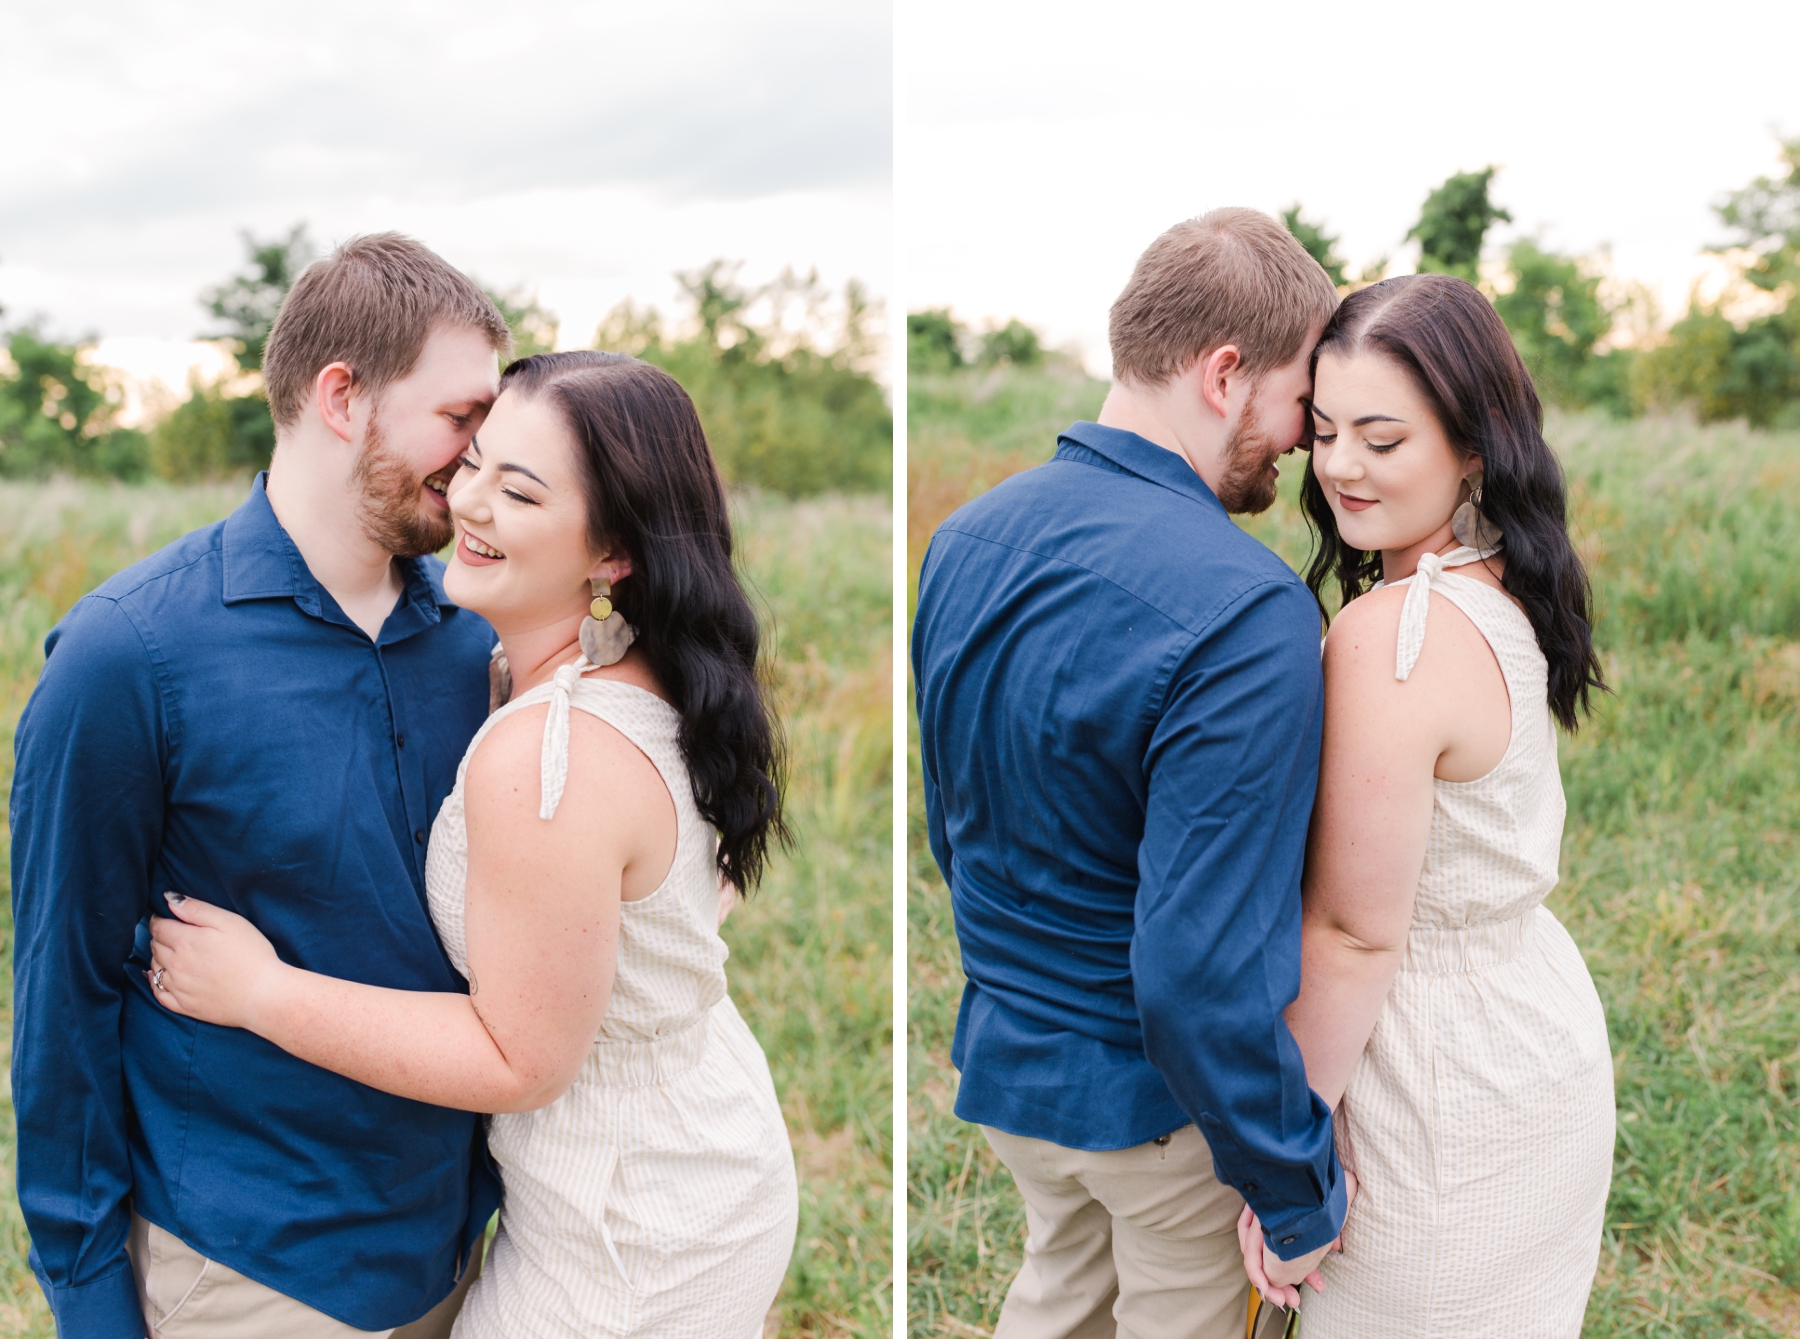 How to get ready for your West Virginia engagement session